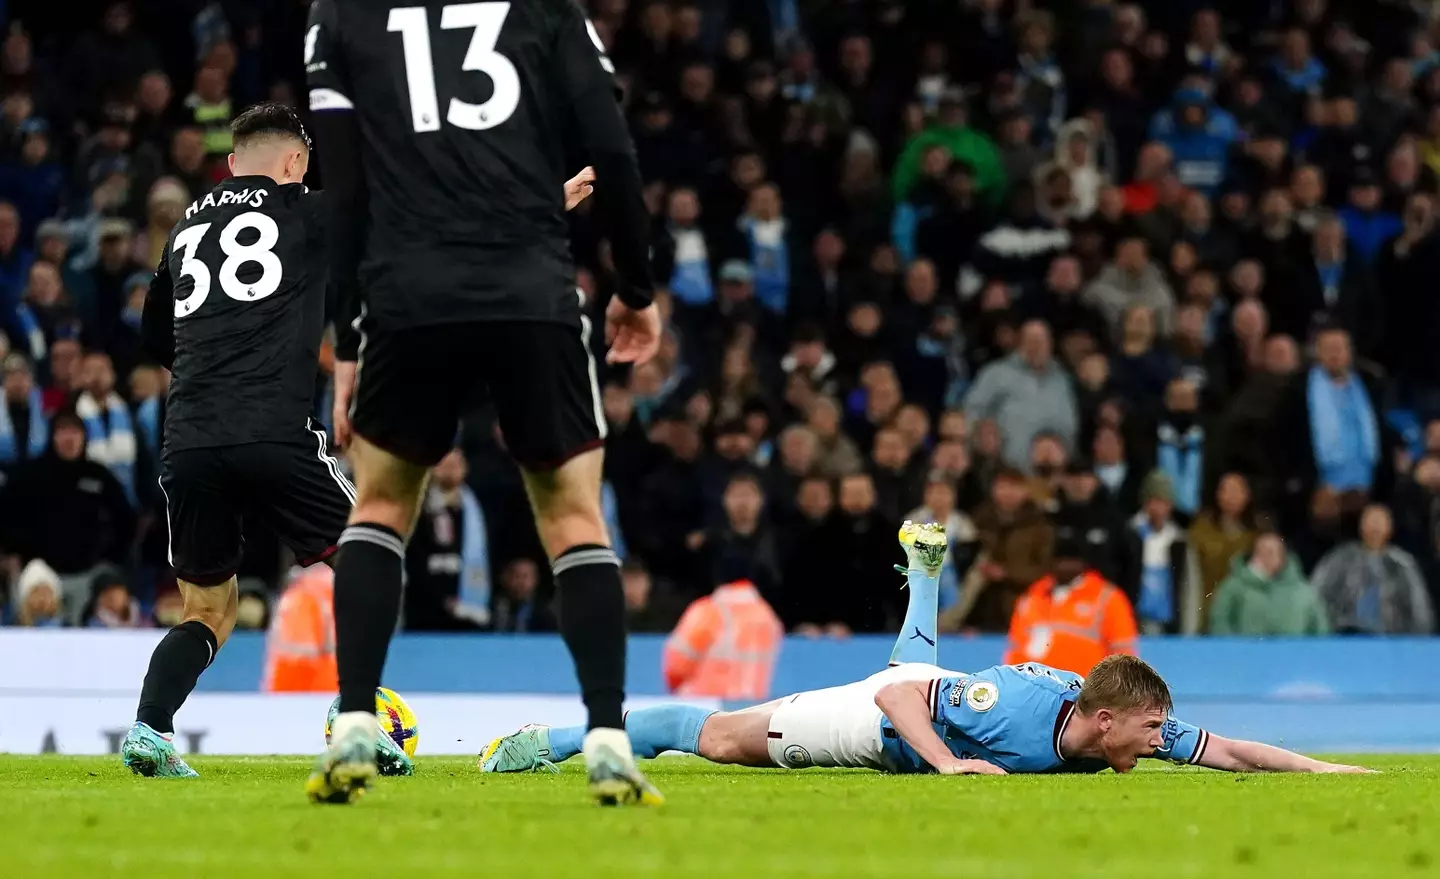 De Bruyne was fouled late on. (Image